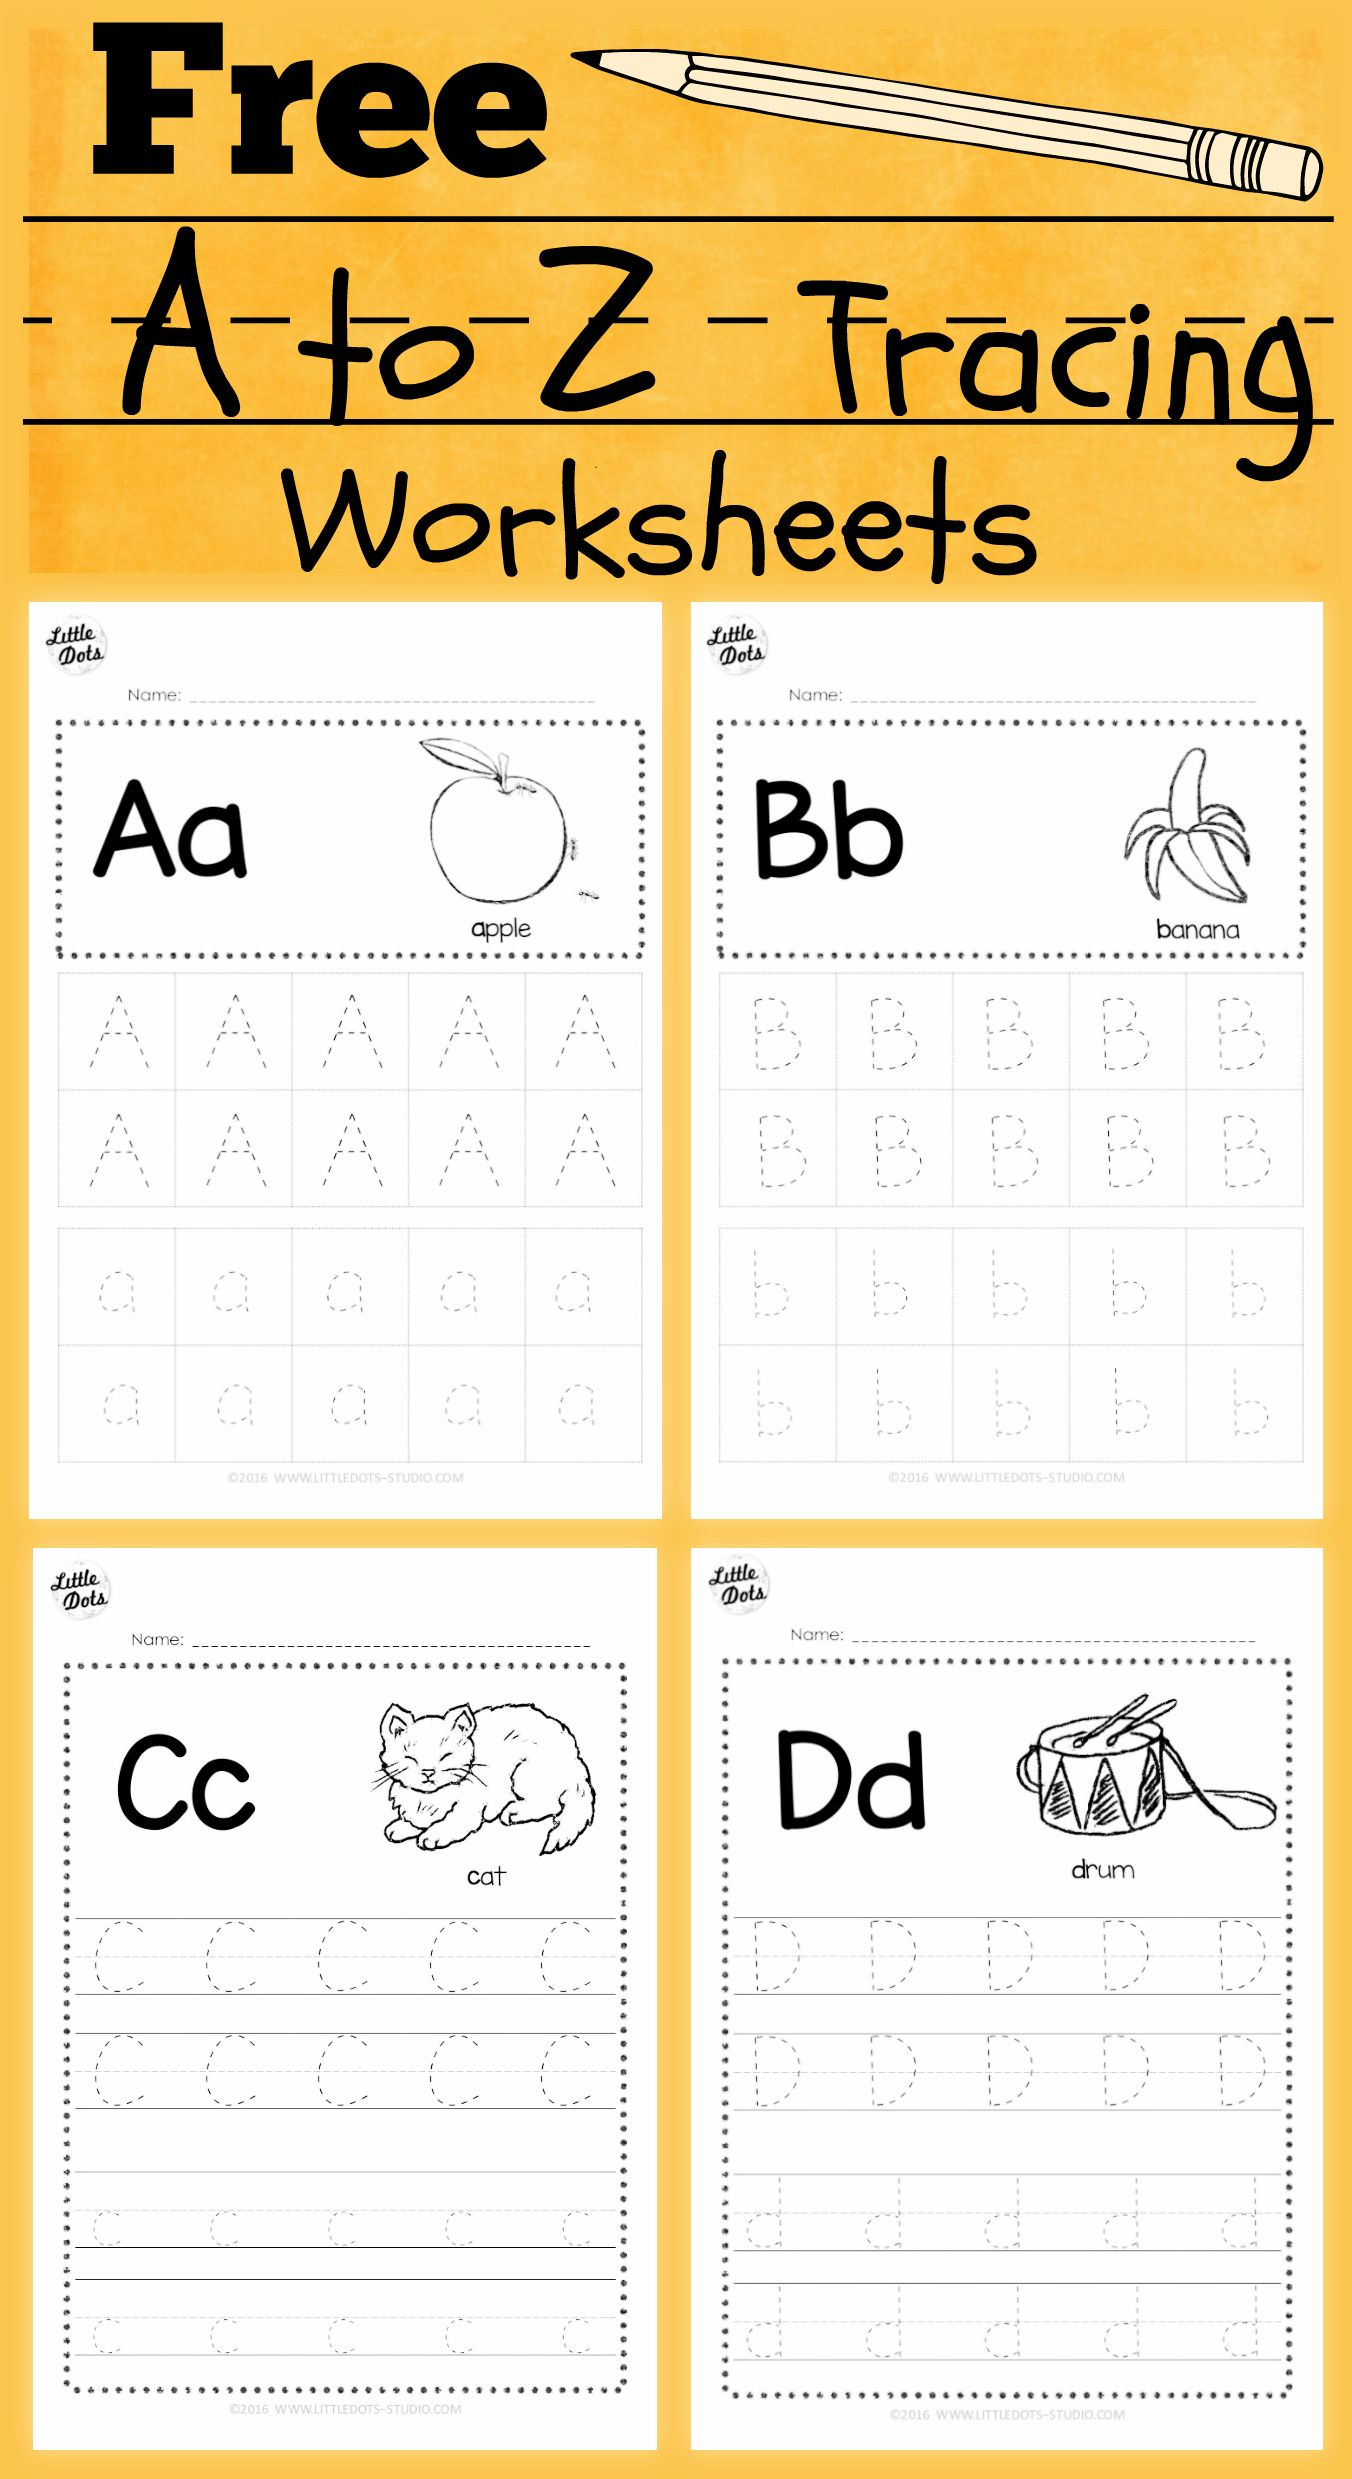 Download Free Alphabet Tracing Worksheets For Letter A To Z throughout Alphabet Worksheets Pdf Free Download